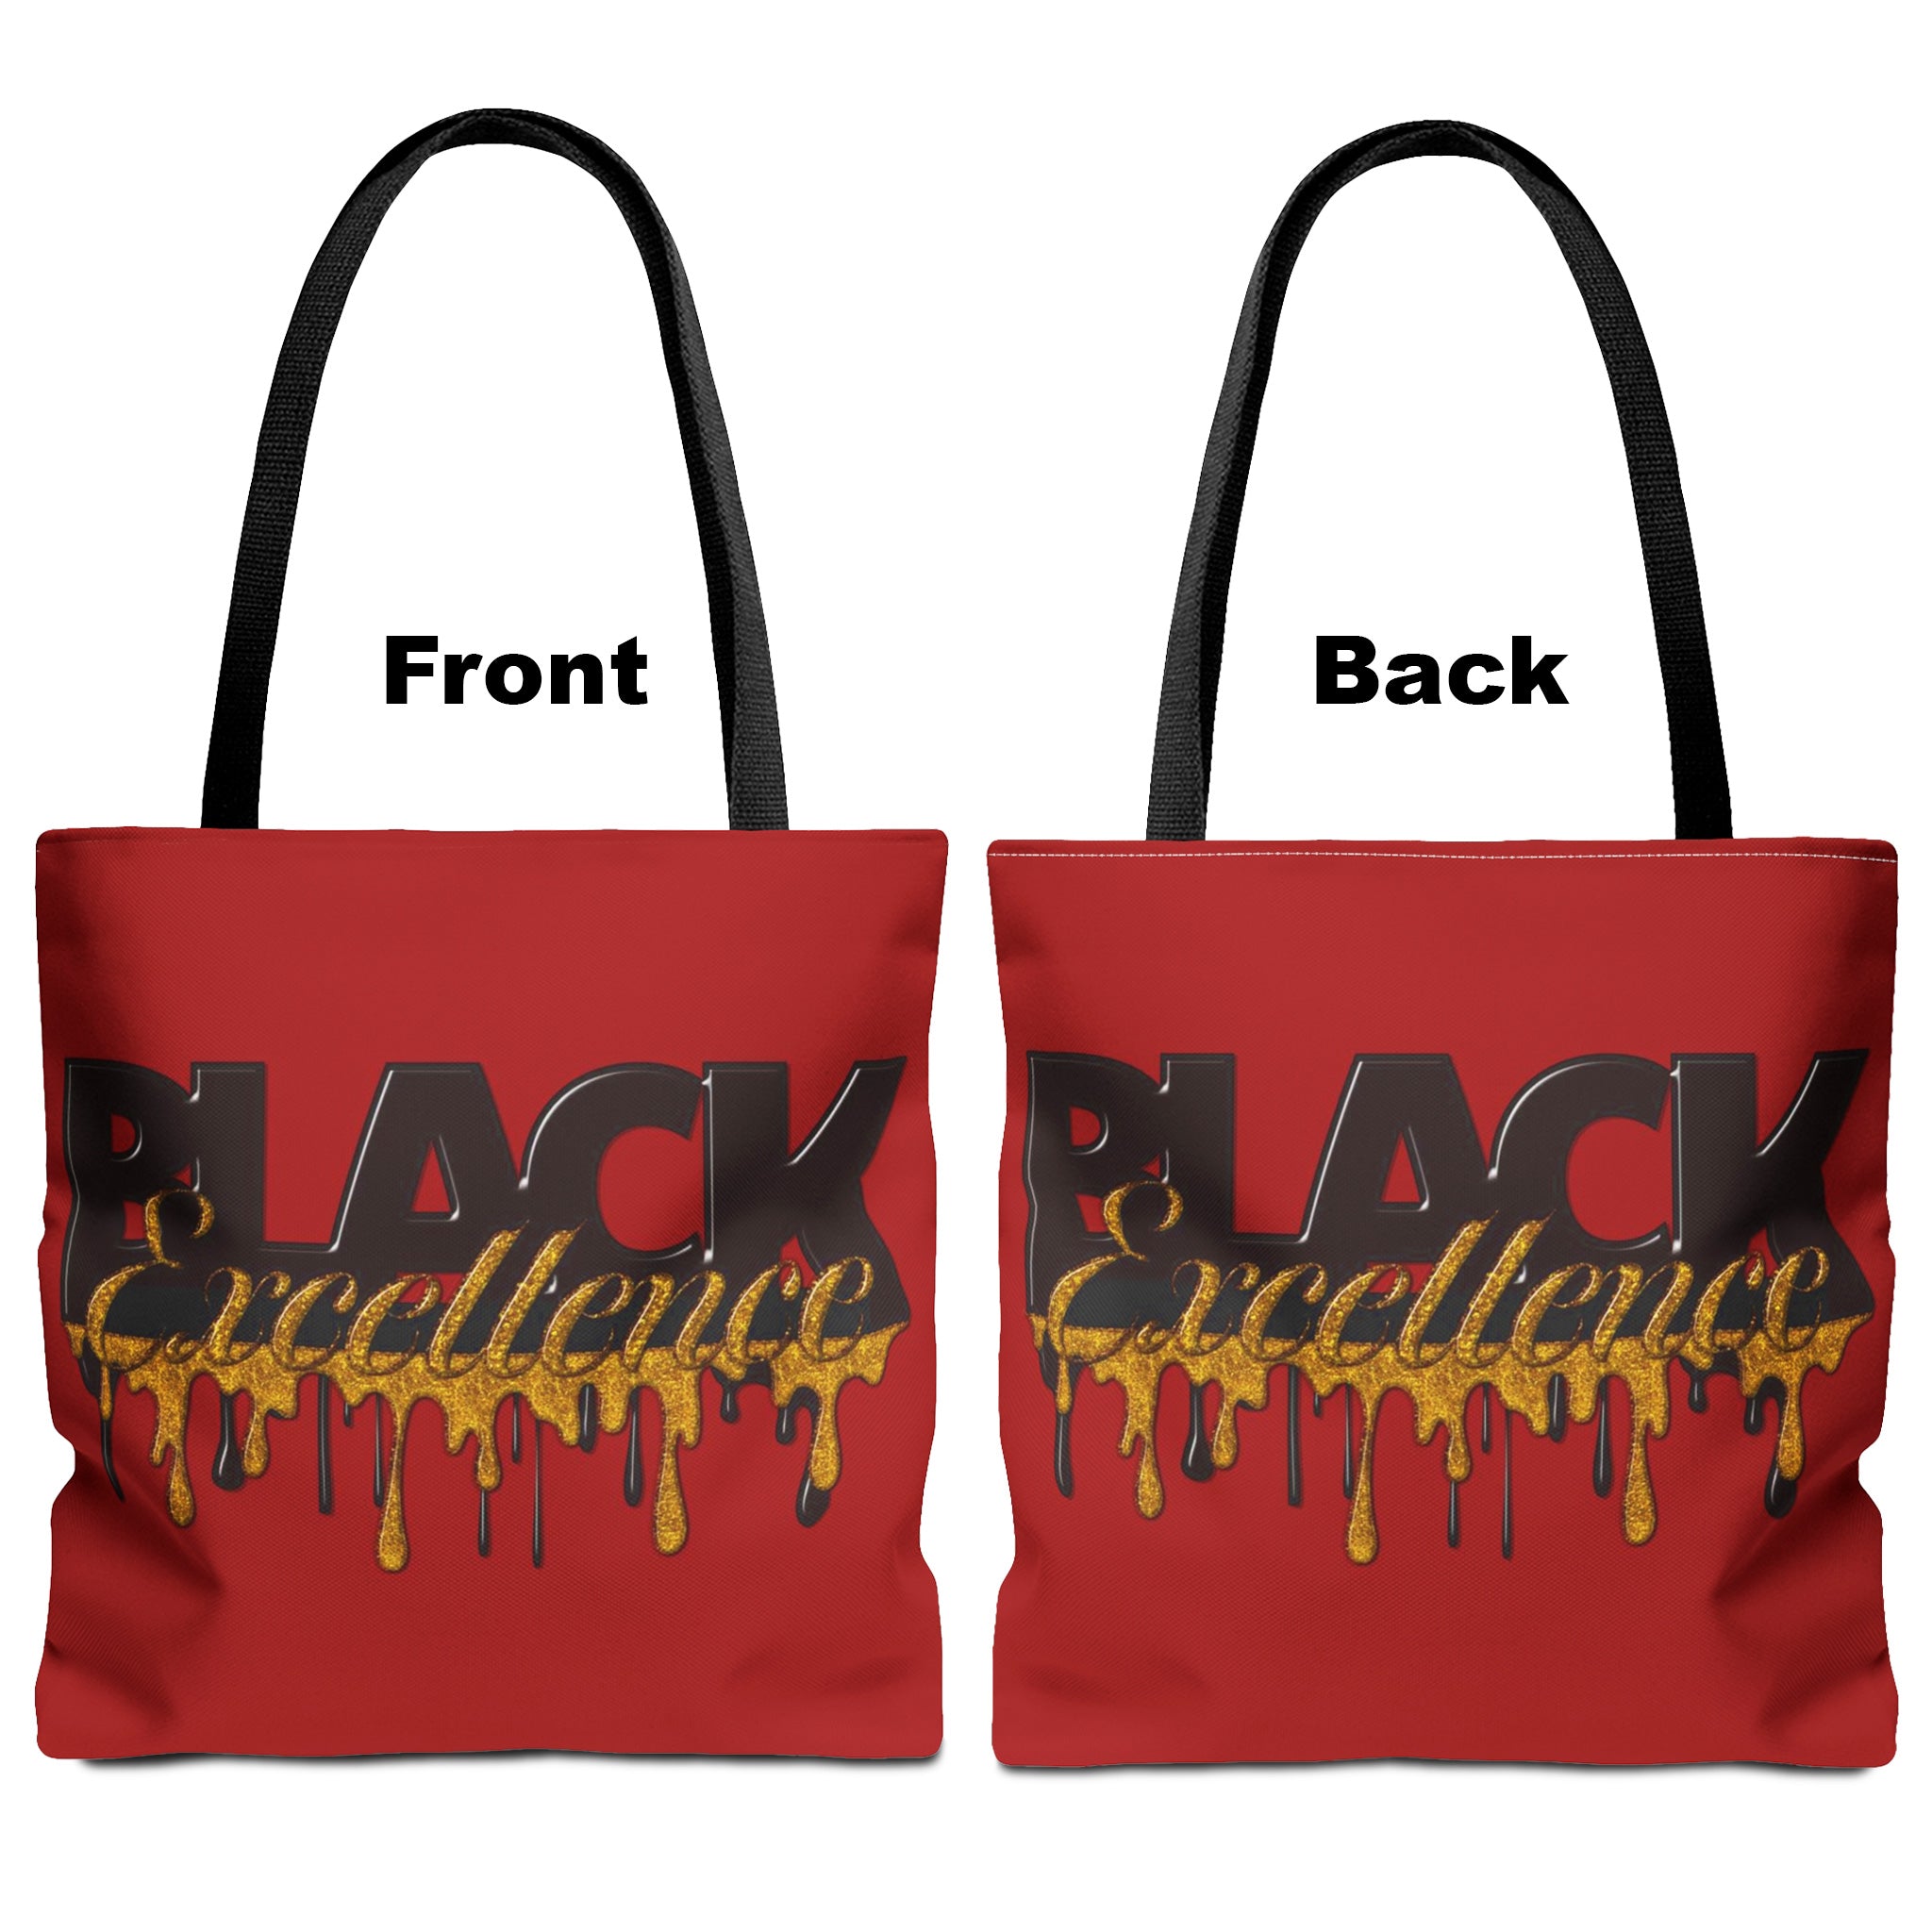 Black Excellence Tote Bag - front and back views.